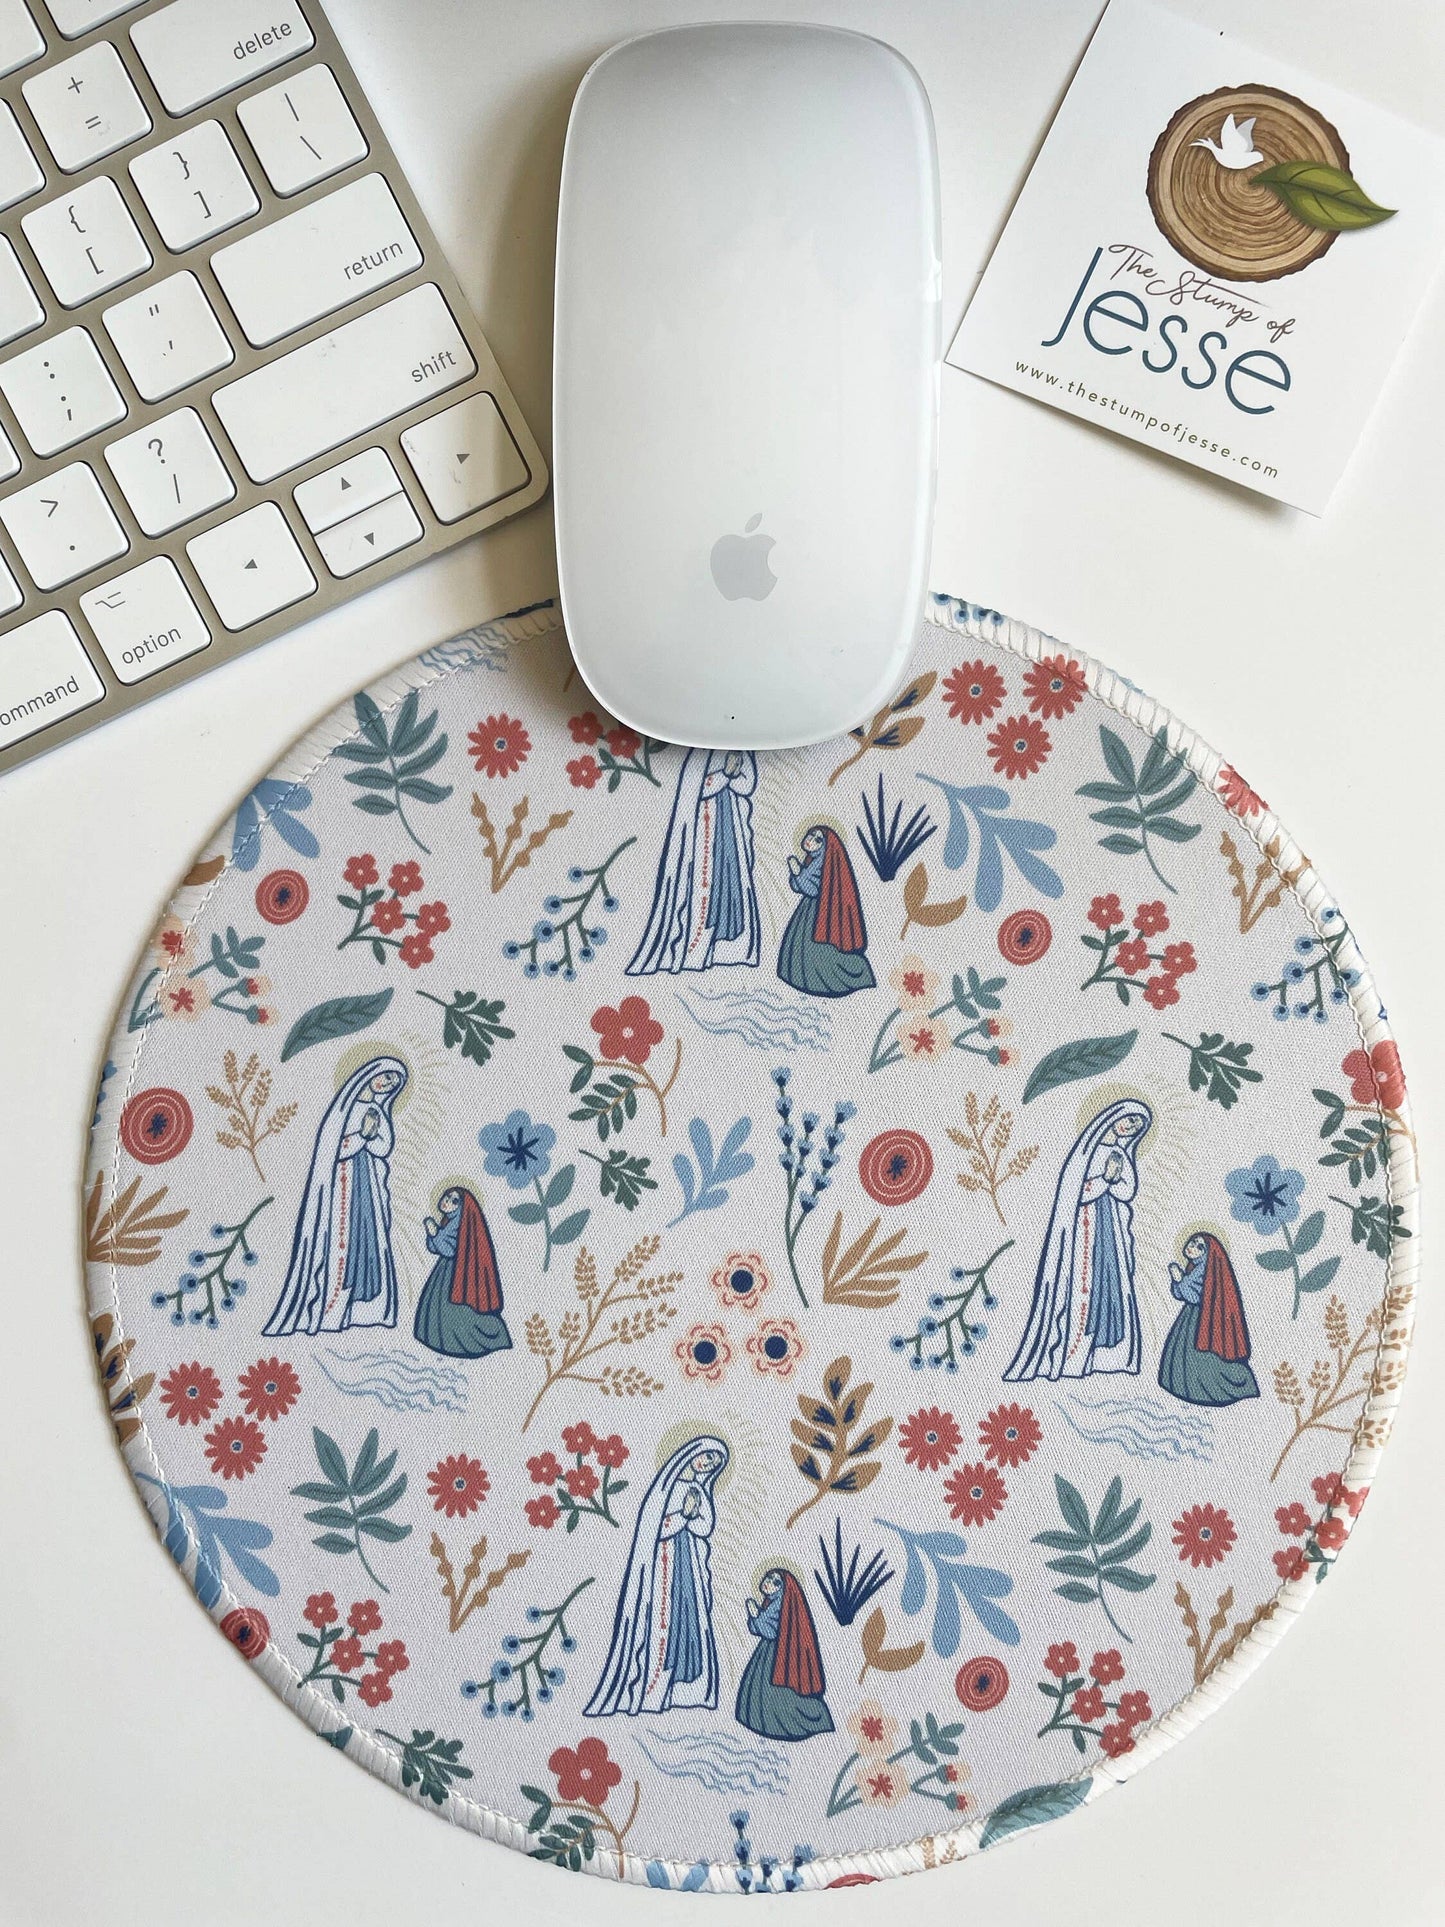 Our Lady of Lourdes Mouse Pad